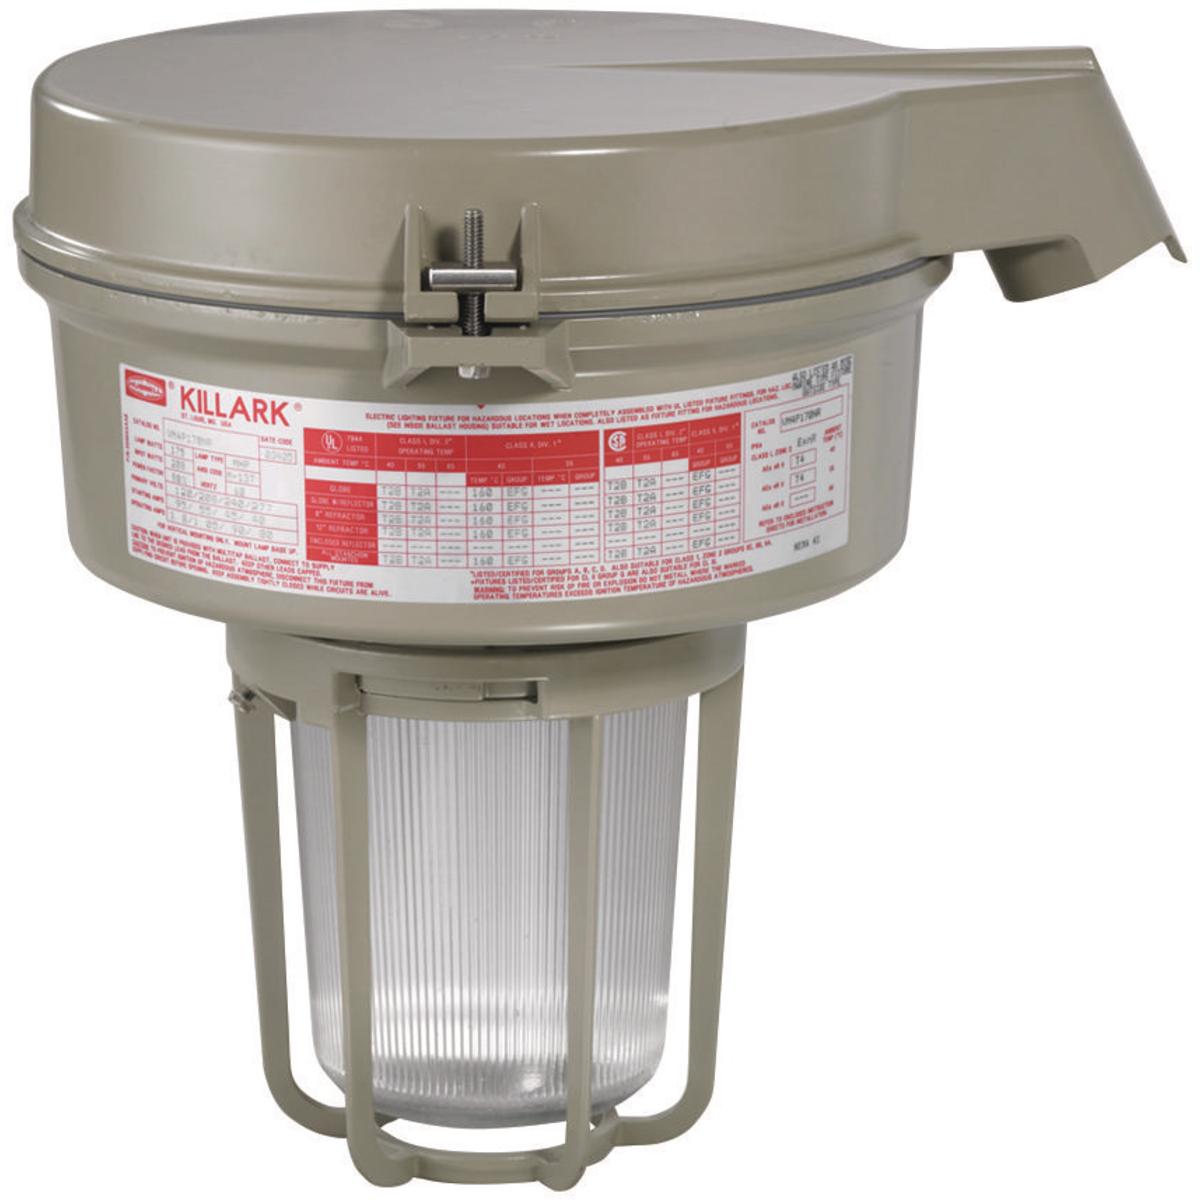 Hubbell VM3H100D5R1G VM3 Series - 100W Metal Halide Quadri-Volt - 1-1/2" Stanchion 25°  - Type I Glass Refractor and Guard  ; Ballast tank and splice box – corrosion resistant copper-free aluminum alloy with baked powder epoxy/polyester finish, electrostatically applied for c